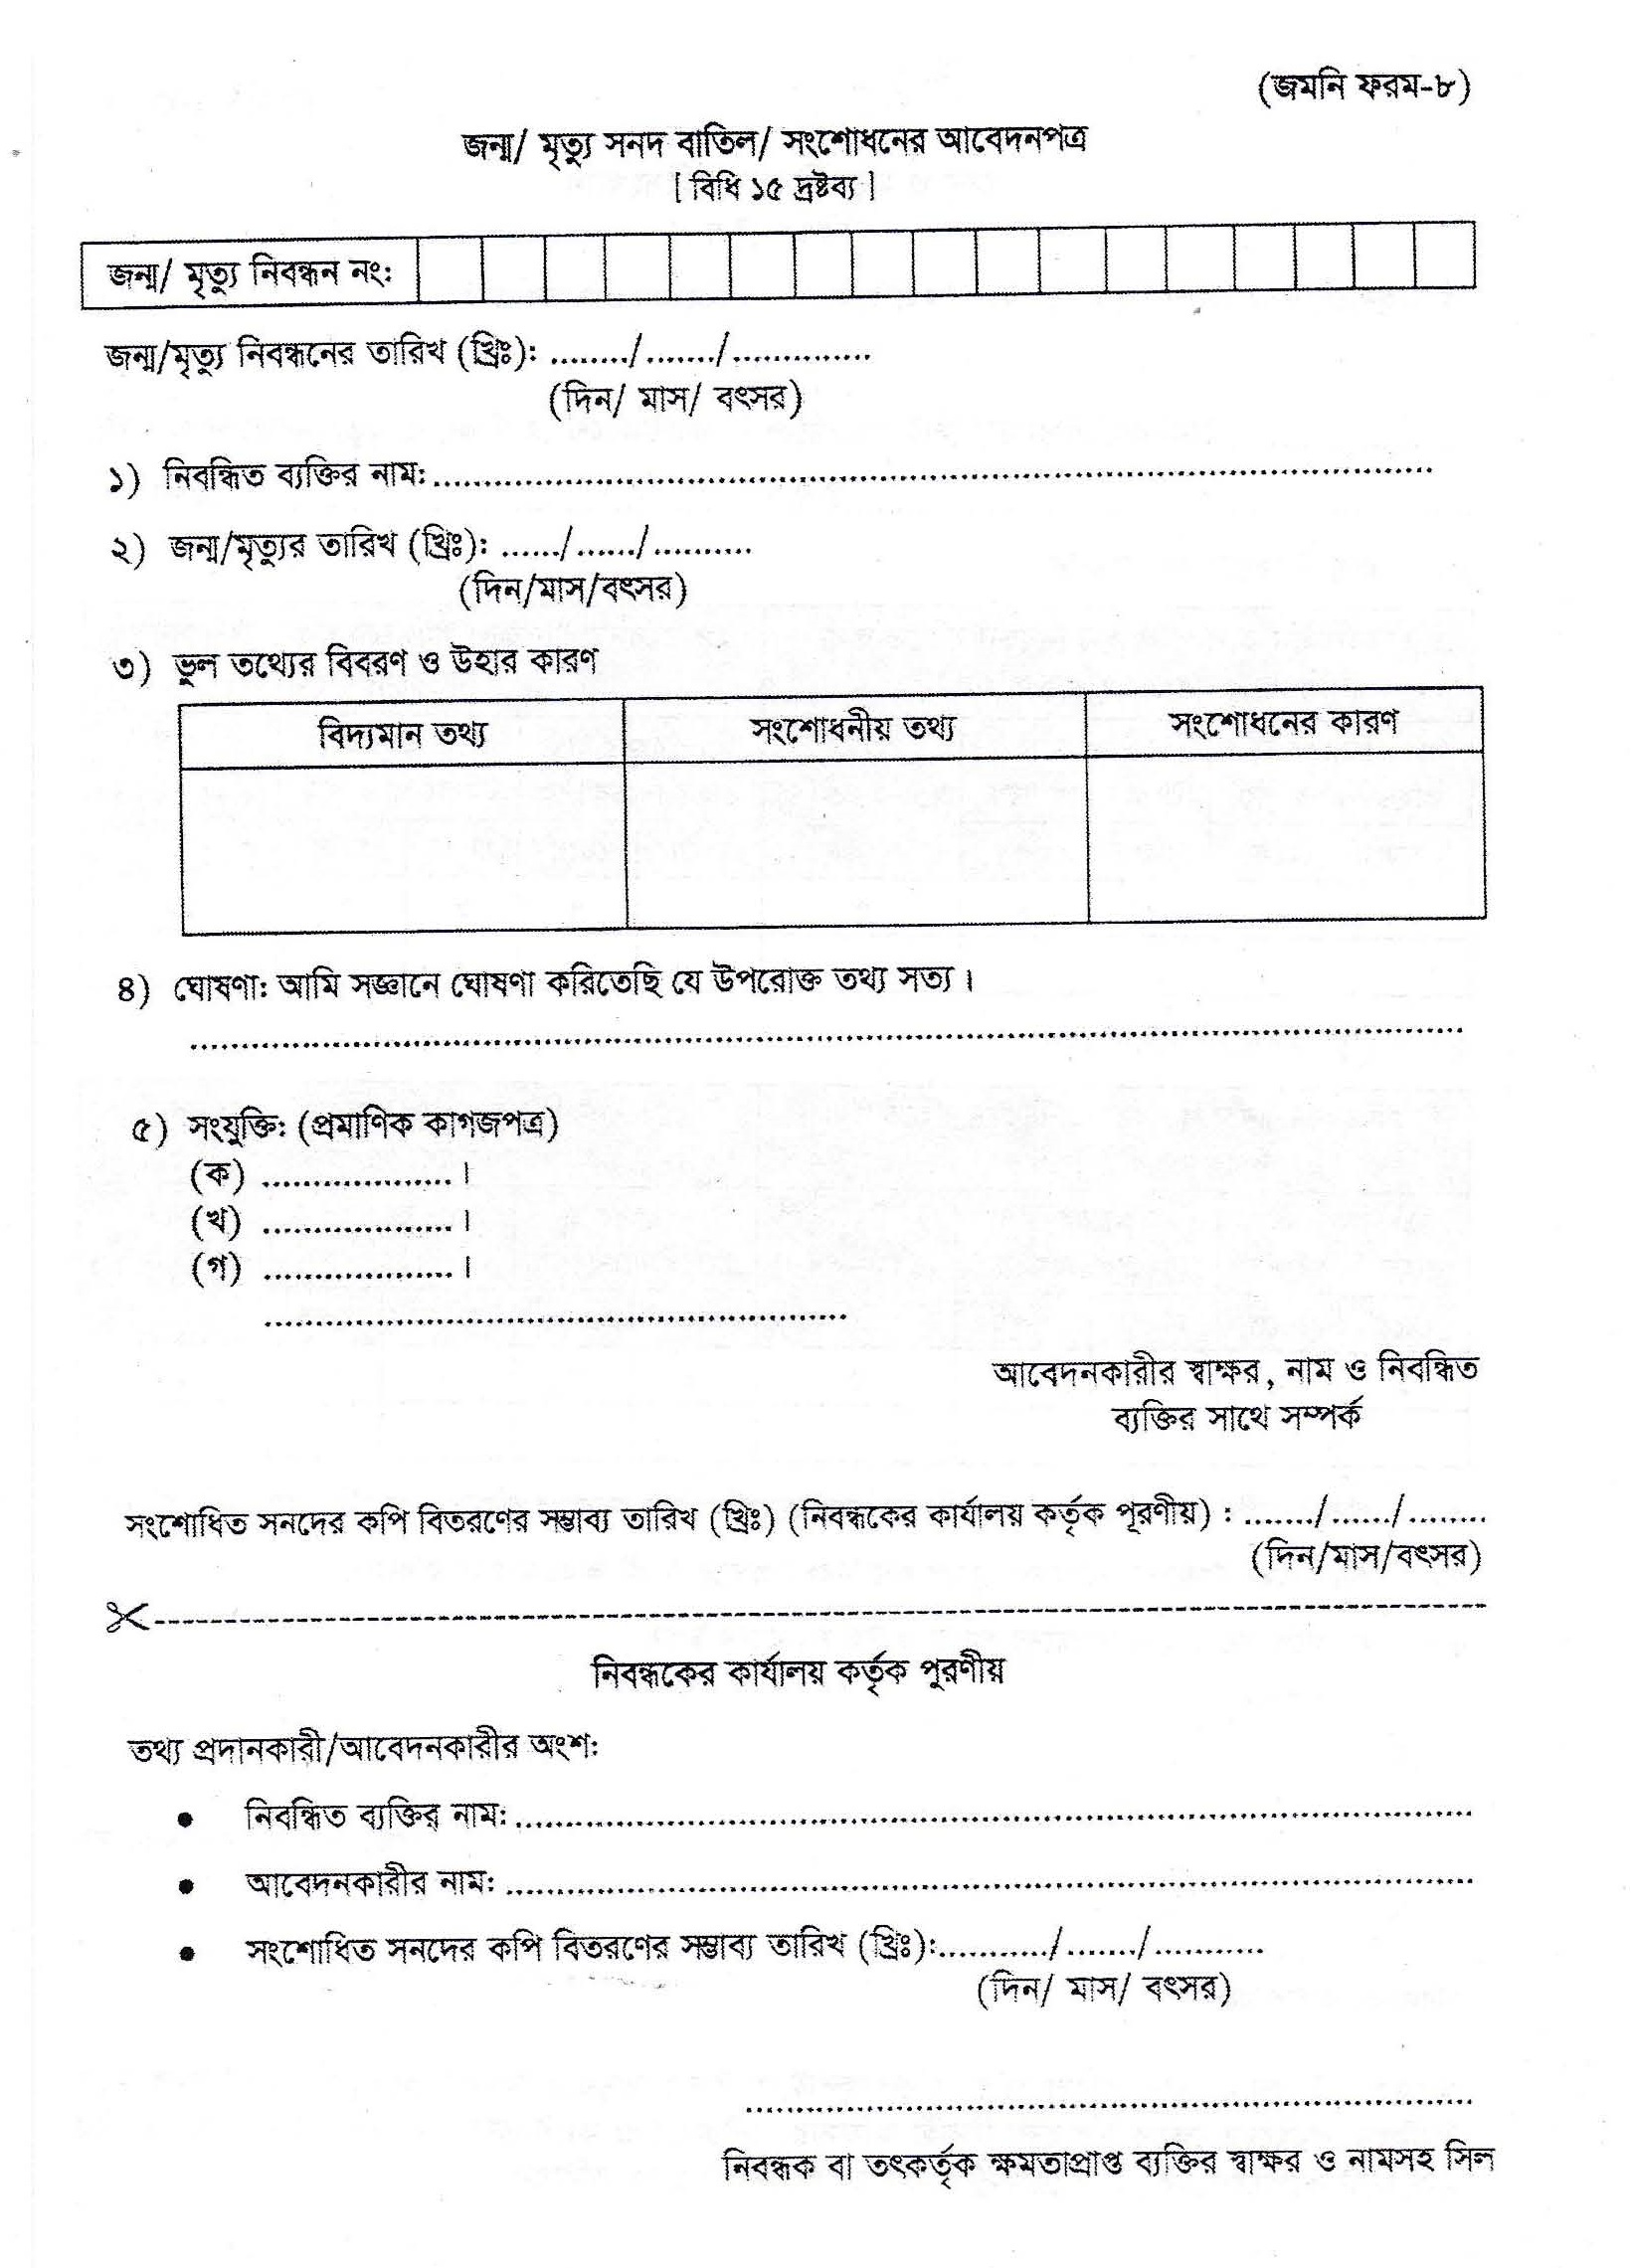 Birth and Death Correction Application Form 2022